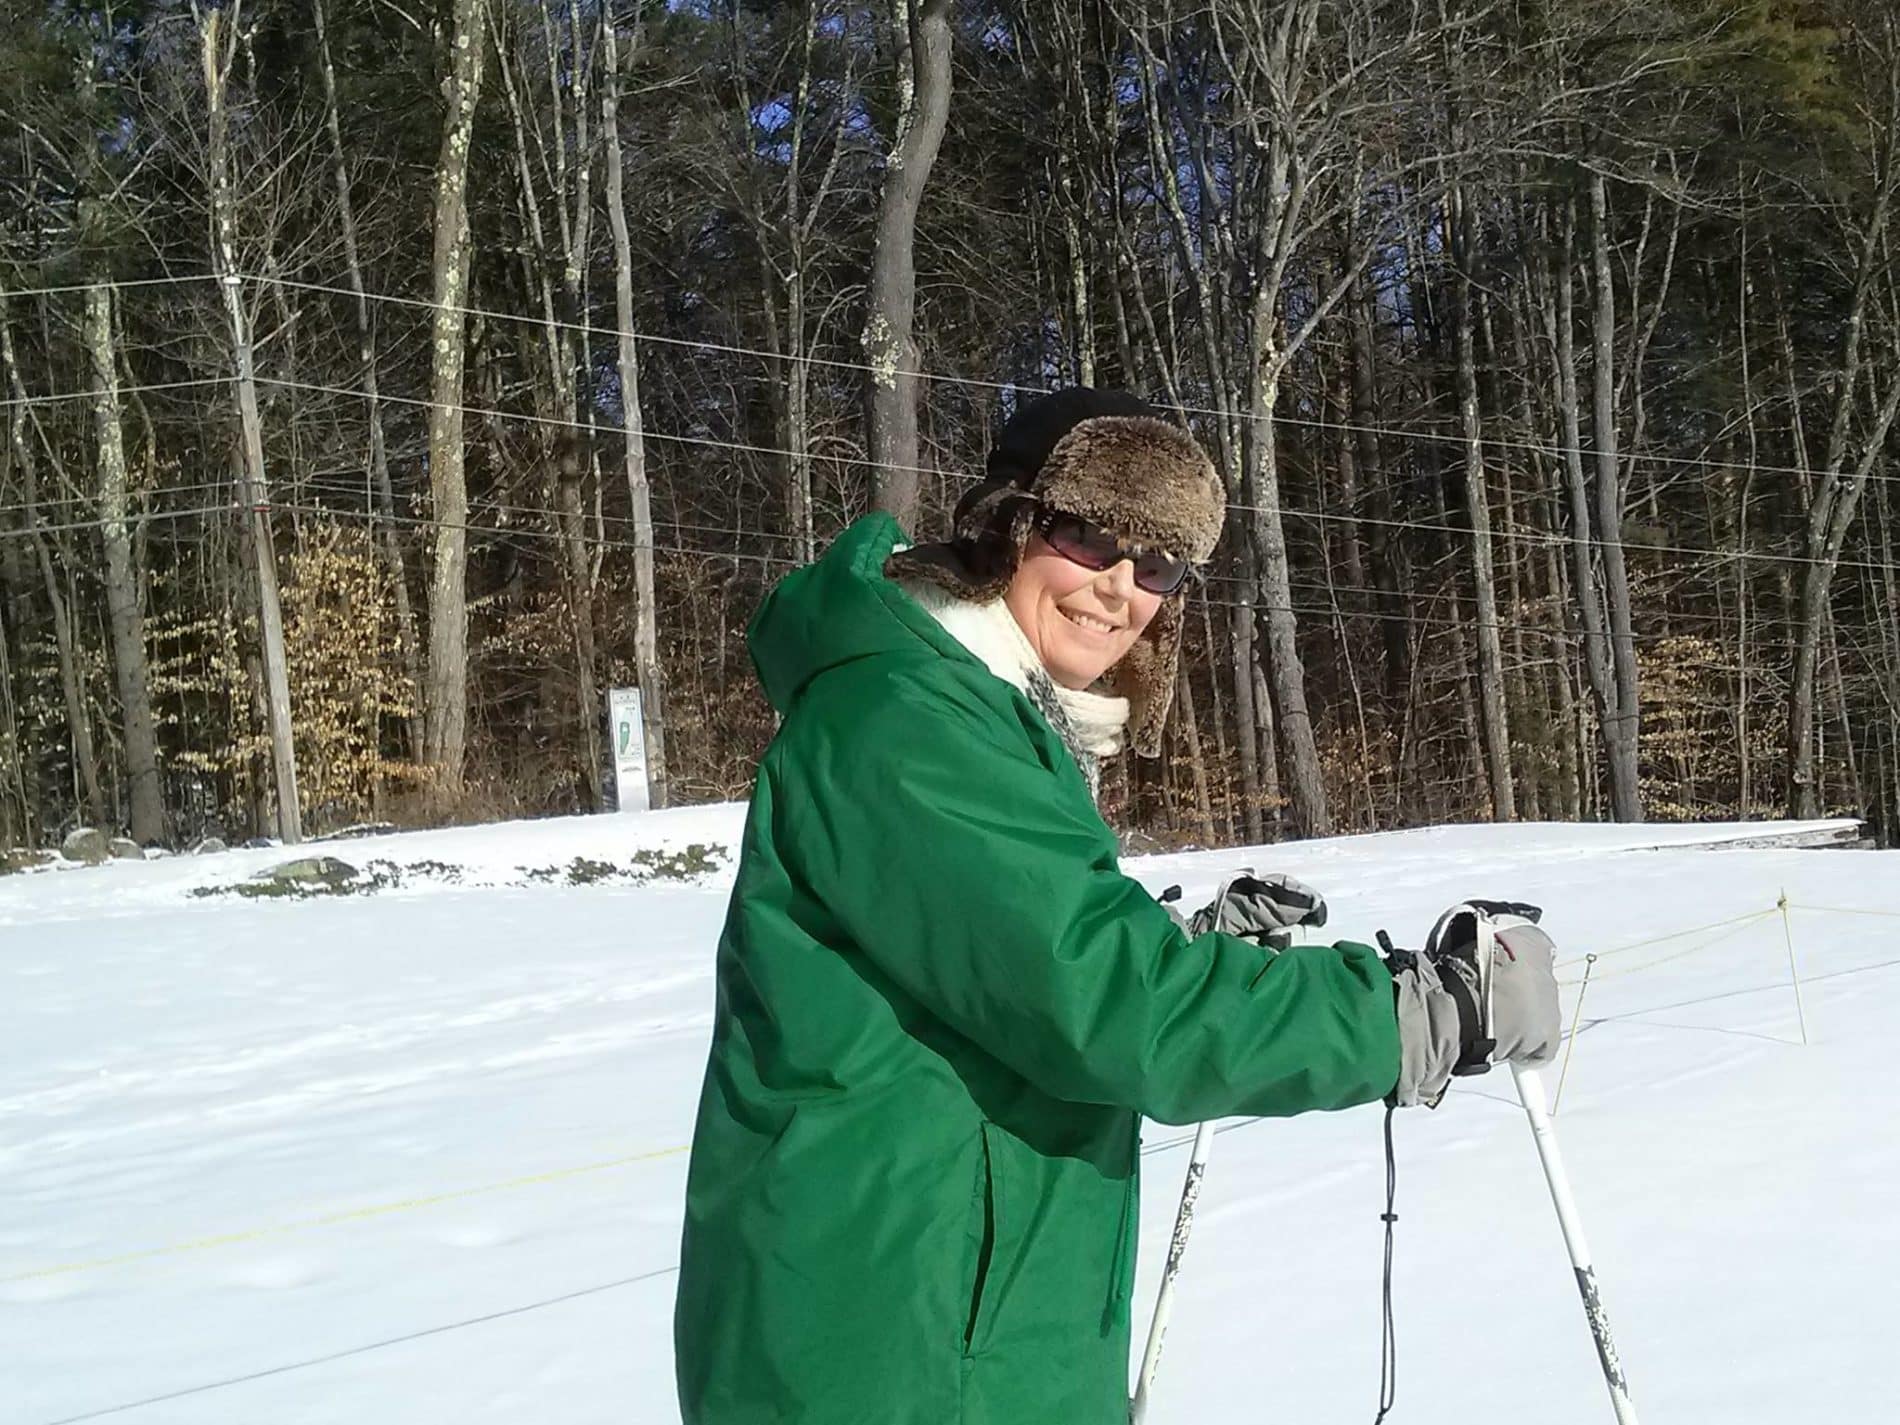 A cross country skier smiles at the camera in her green jacket while she makes her way through the snow